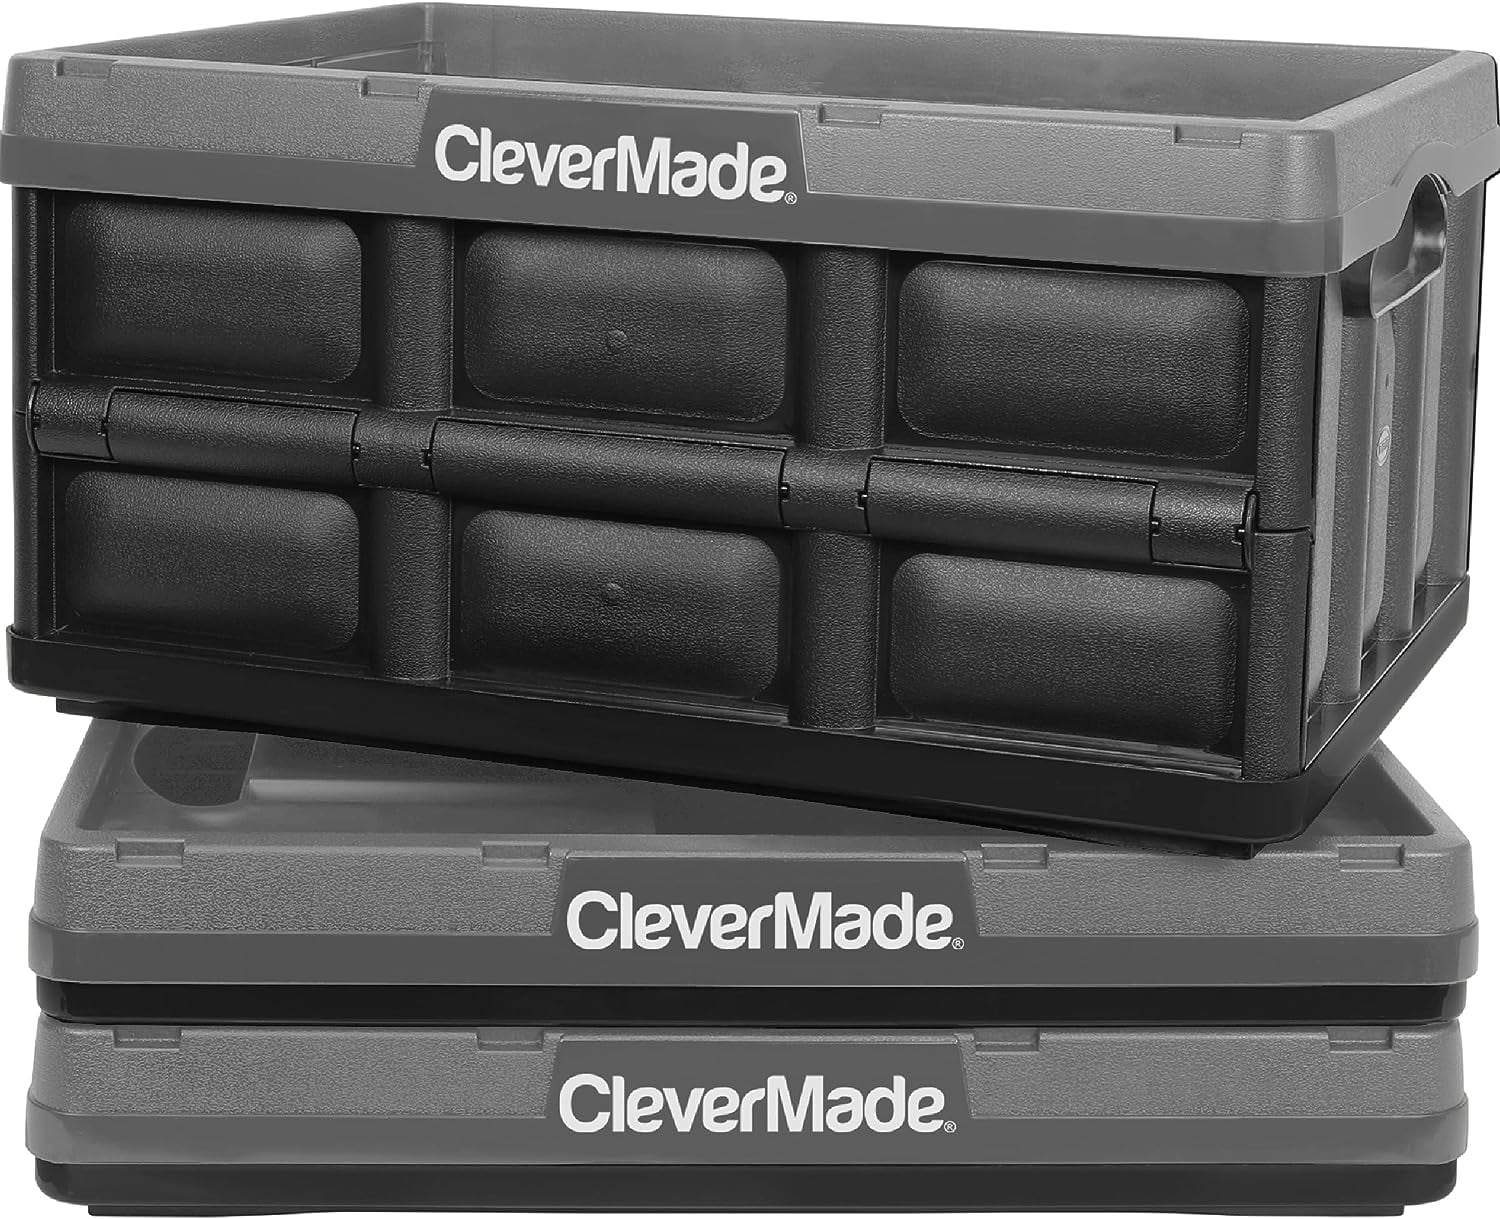 Clevermade 3pk Collapsible Storage Bin 46L No Lid